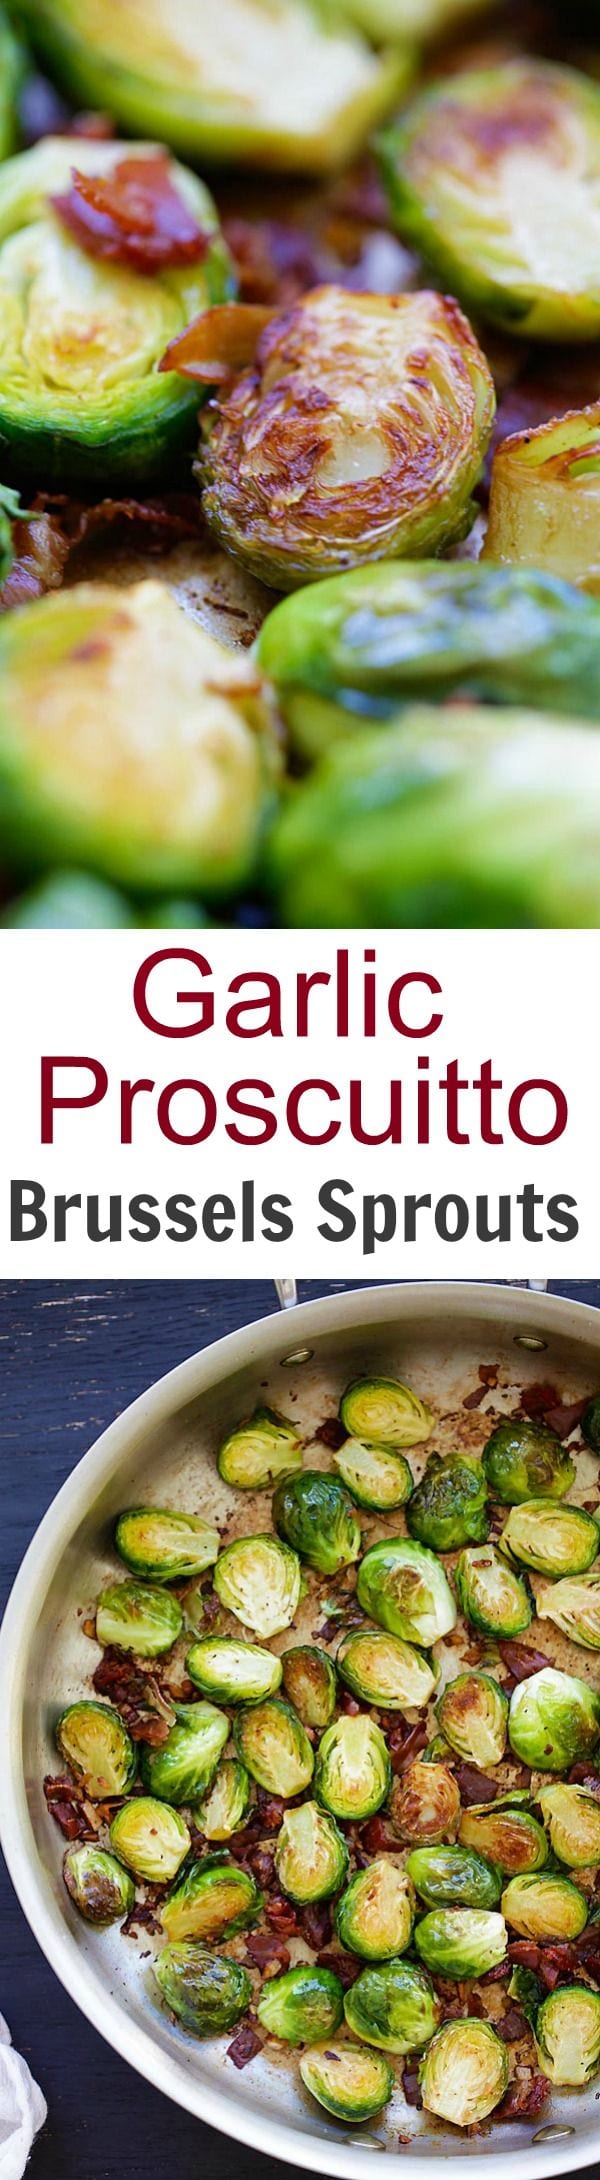 Garlic-Prosciutto Brussels Sprouts – roasted brussels sprouts with smoky prosciutto. Saute on skillet and finish in oven, 20 mins only | rasamalaysia.com